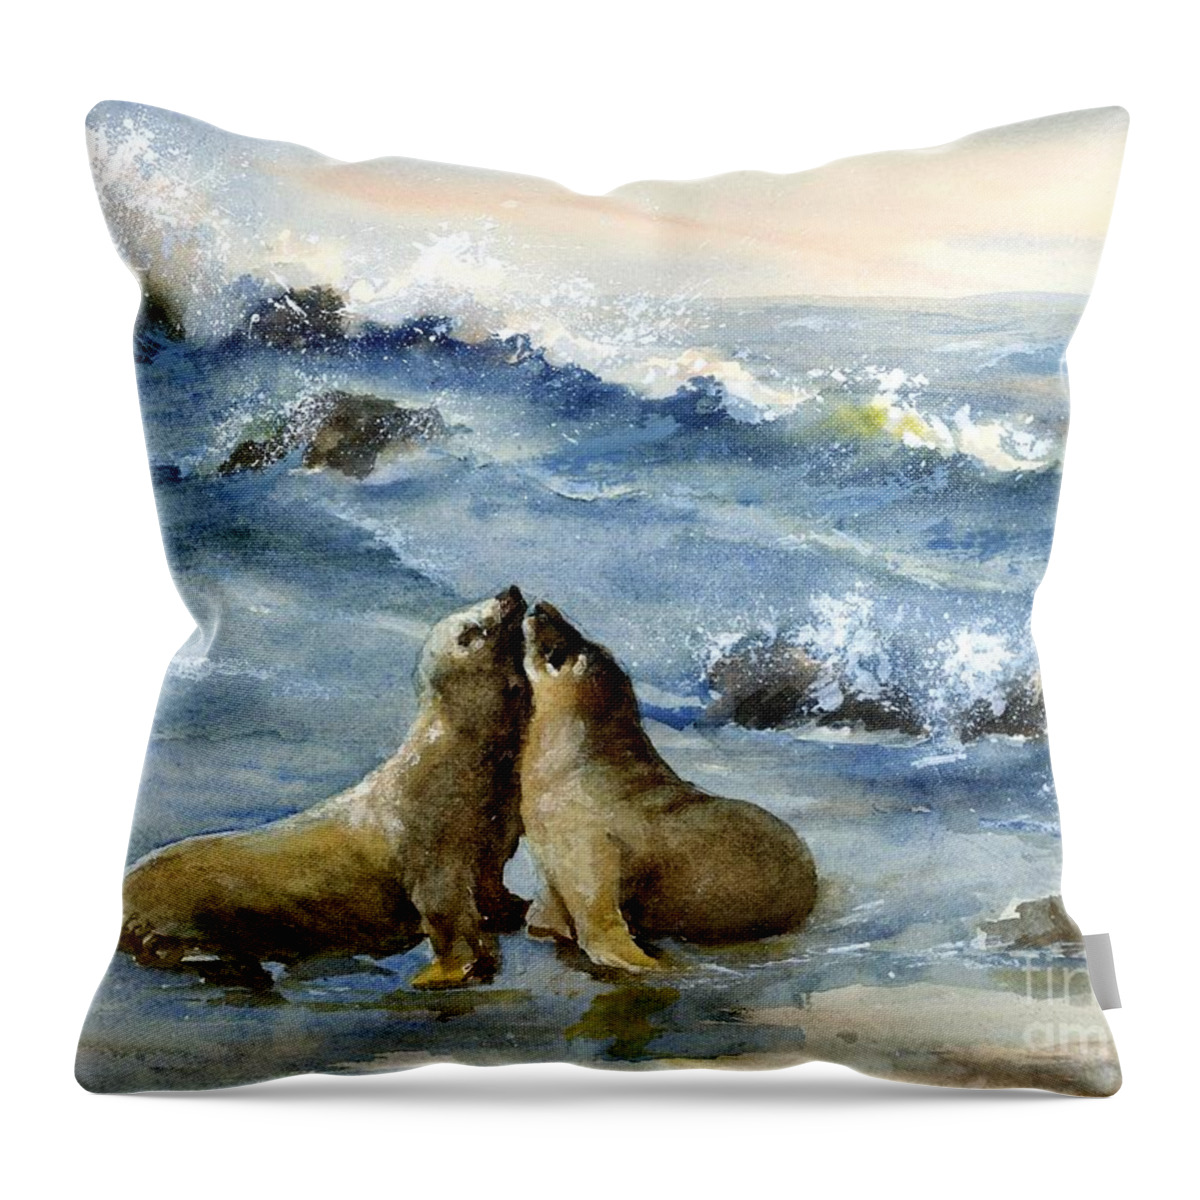 A Lovely Sea Lion Couple Stealing Kisses As Waves Crash On The Rocks Behind Them. Throw Pillow featuring the painting California Sea Lions by Virginia Potter